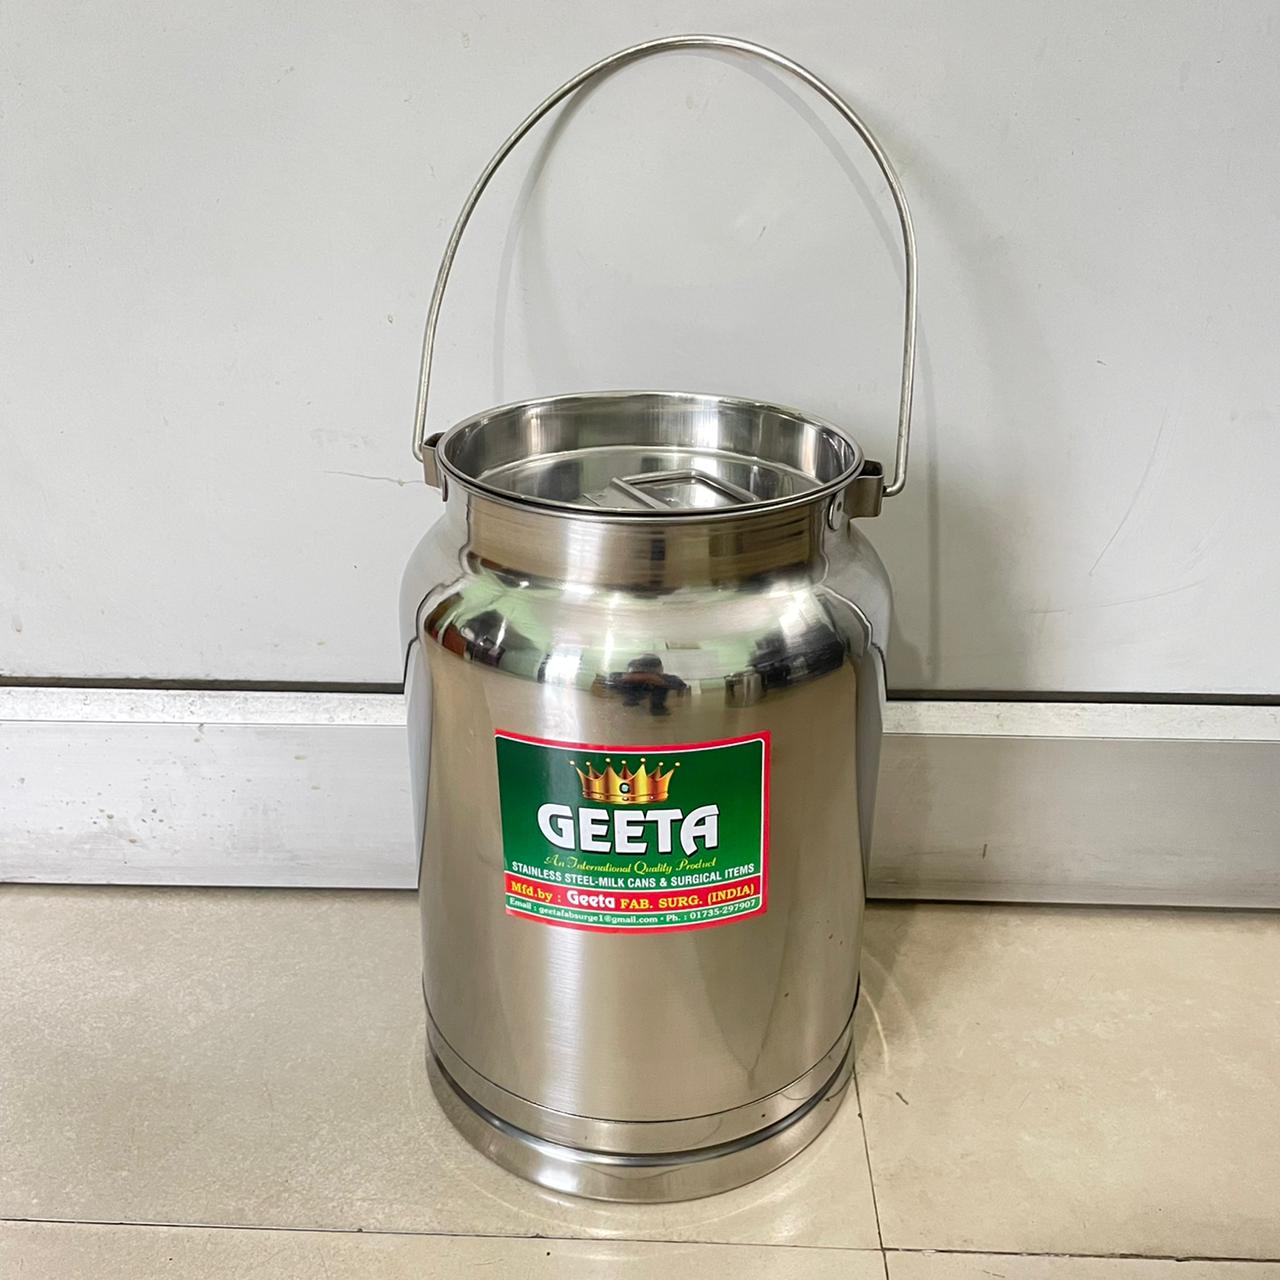 ss milk can 10 ltr from Geeta Fab Surg (INDIA)